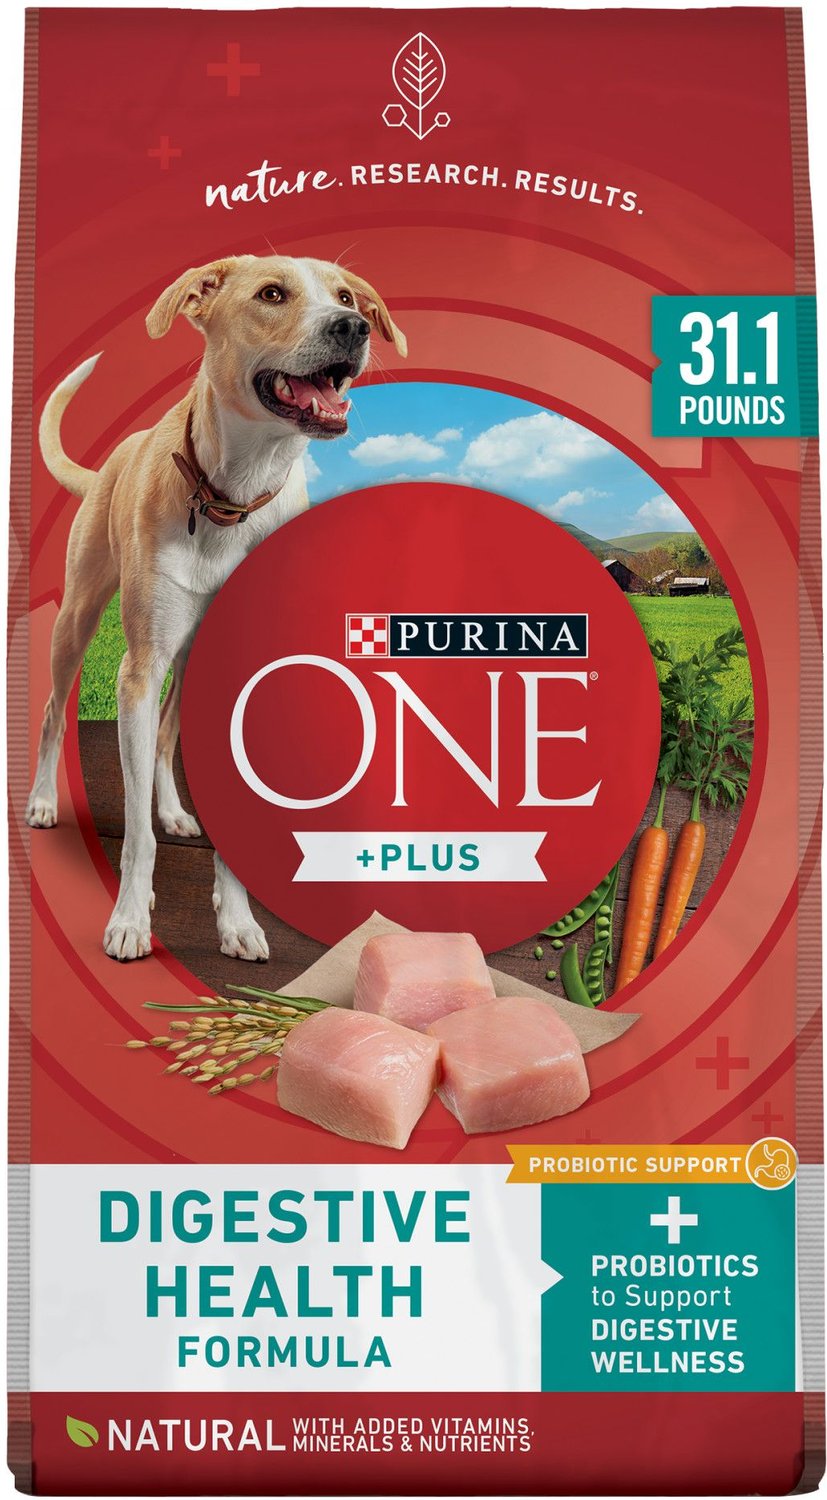 why is purina bad for dogs